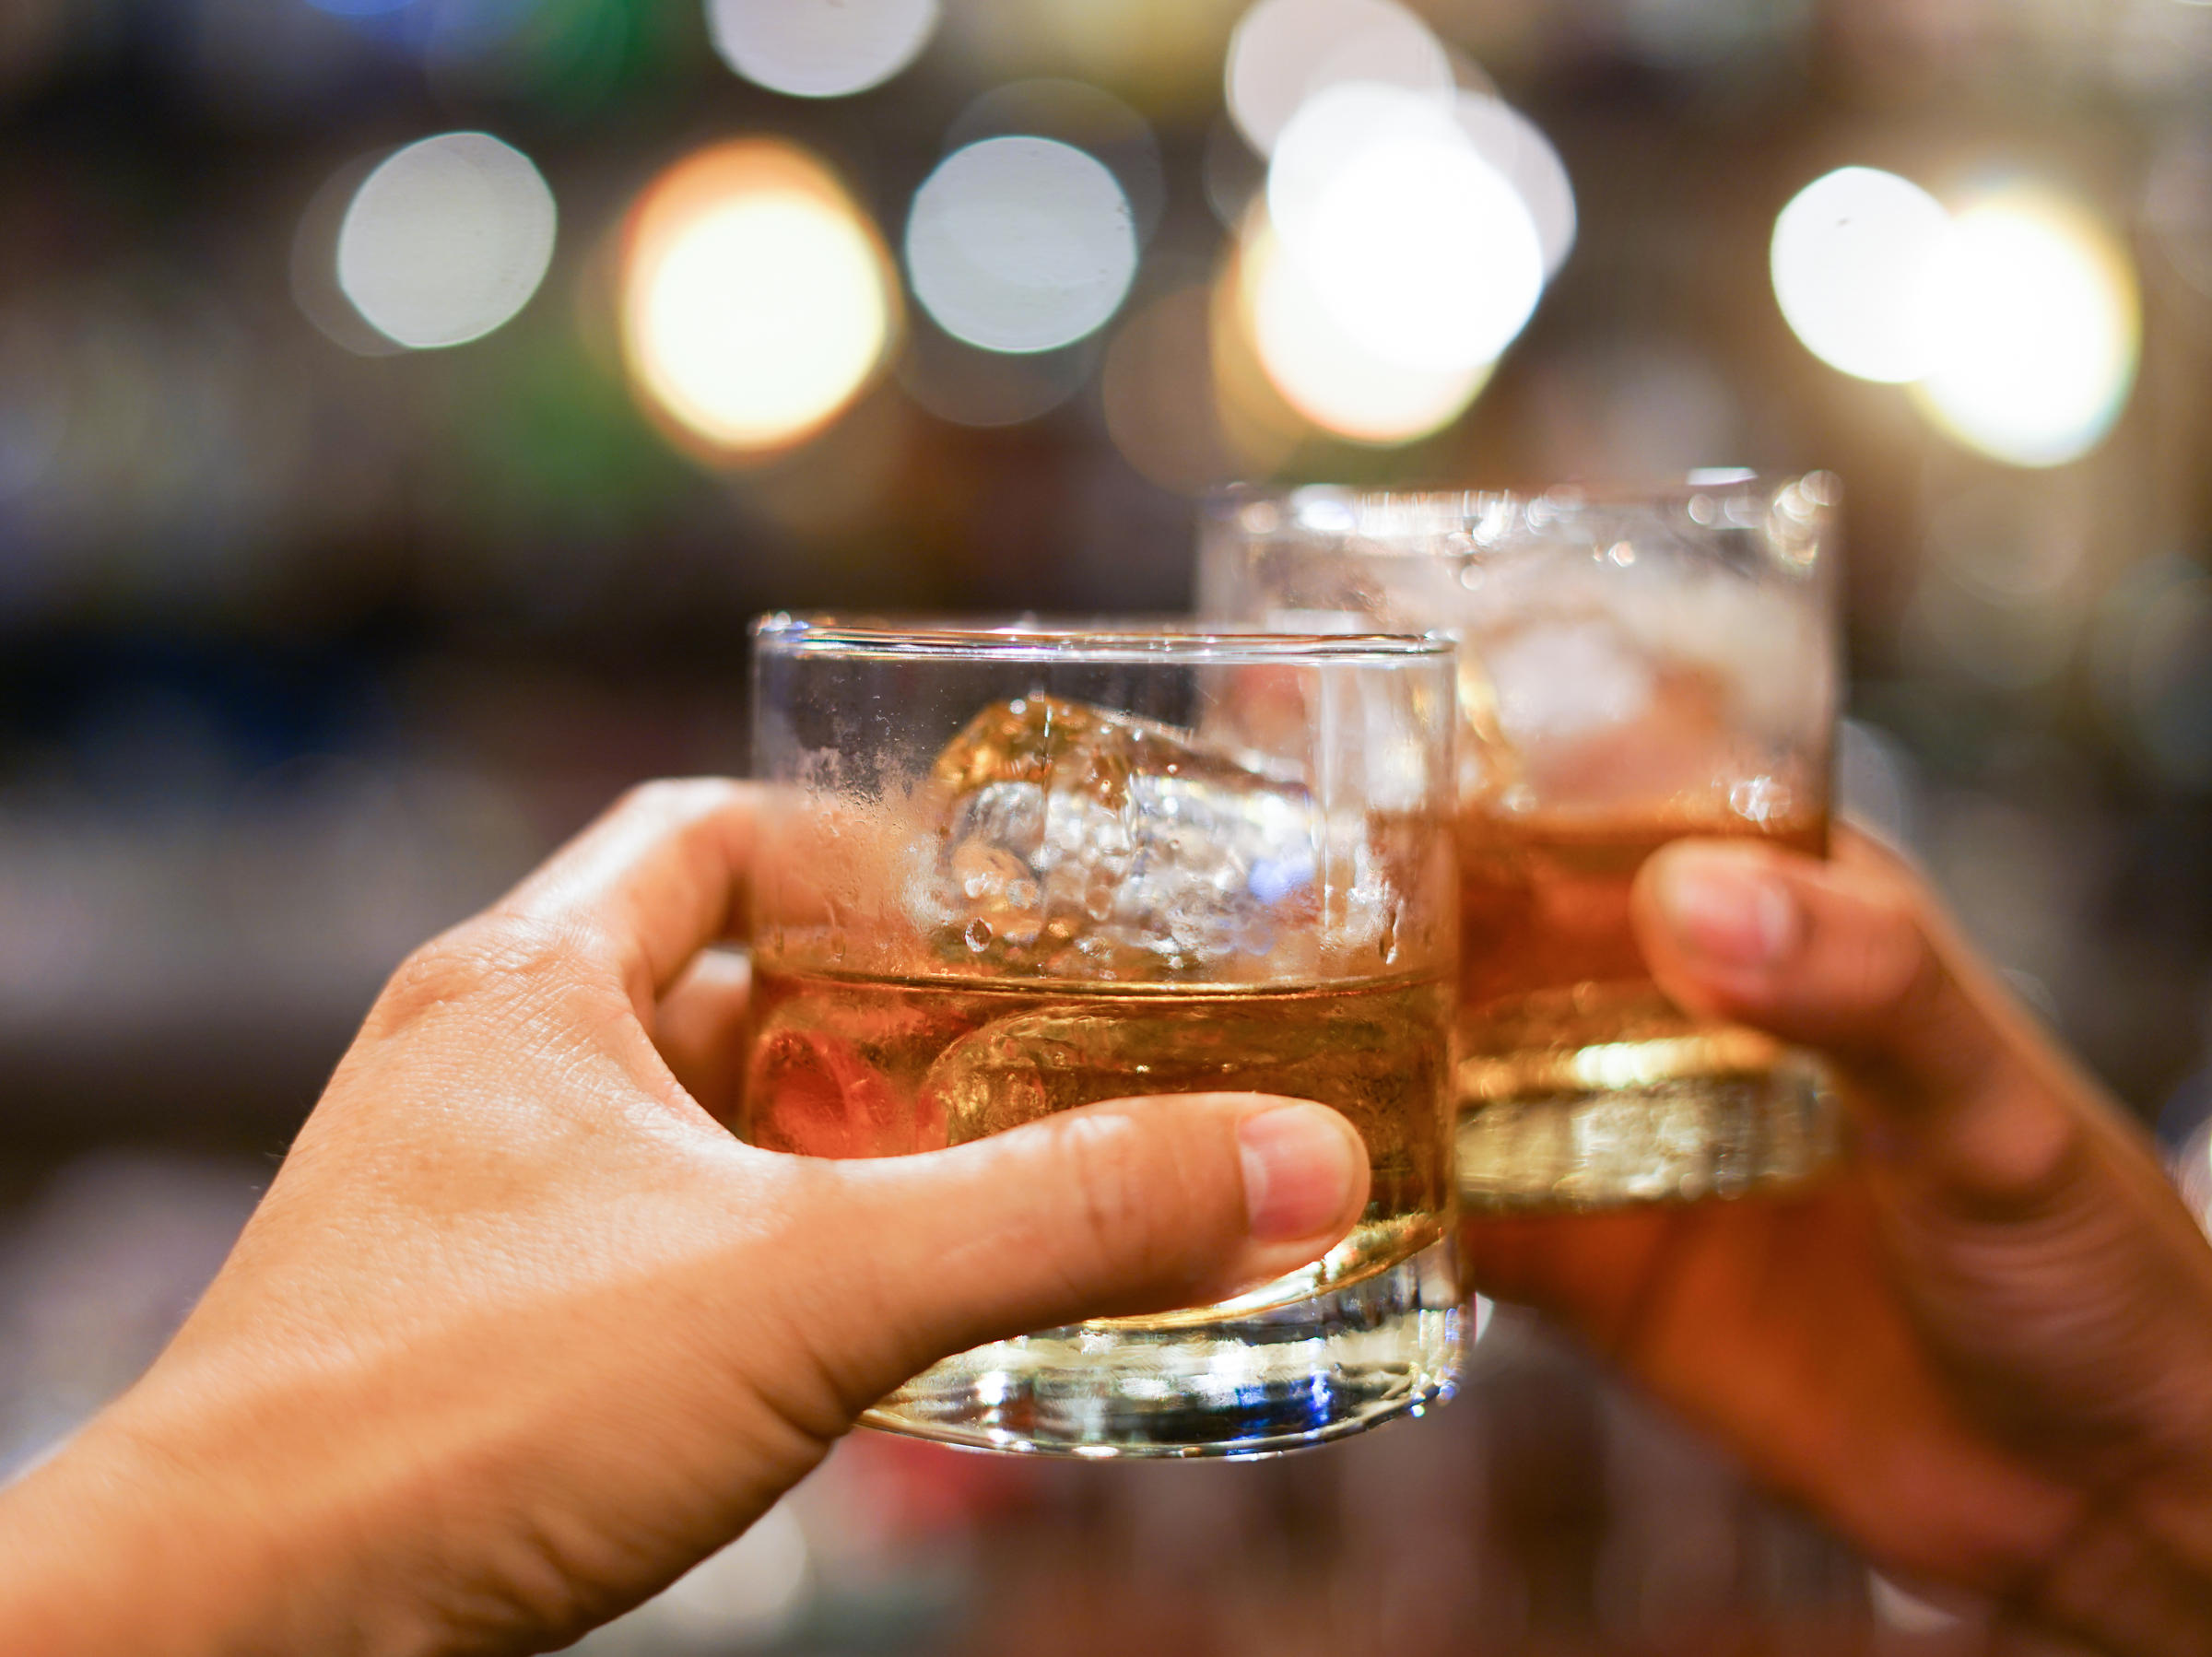 Alcohol Delivery Company Drizly Sees Sales Jump Amid ...